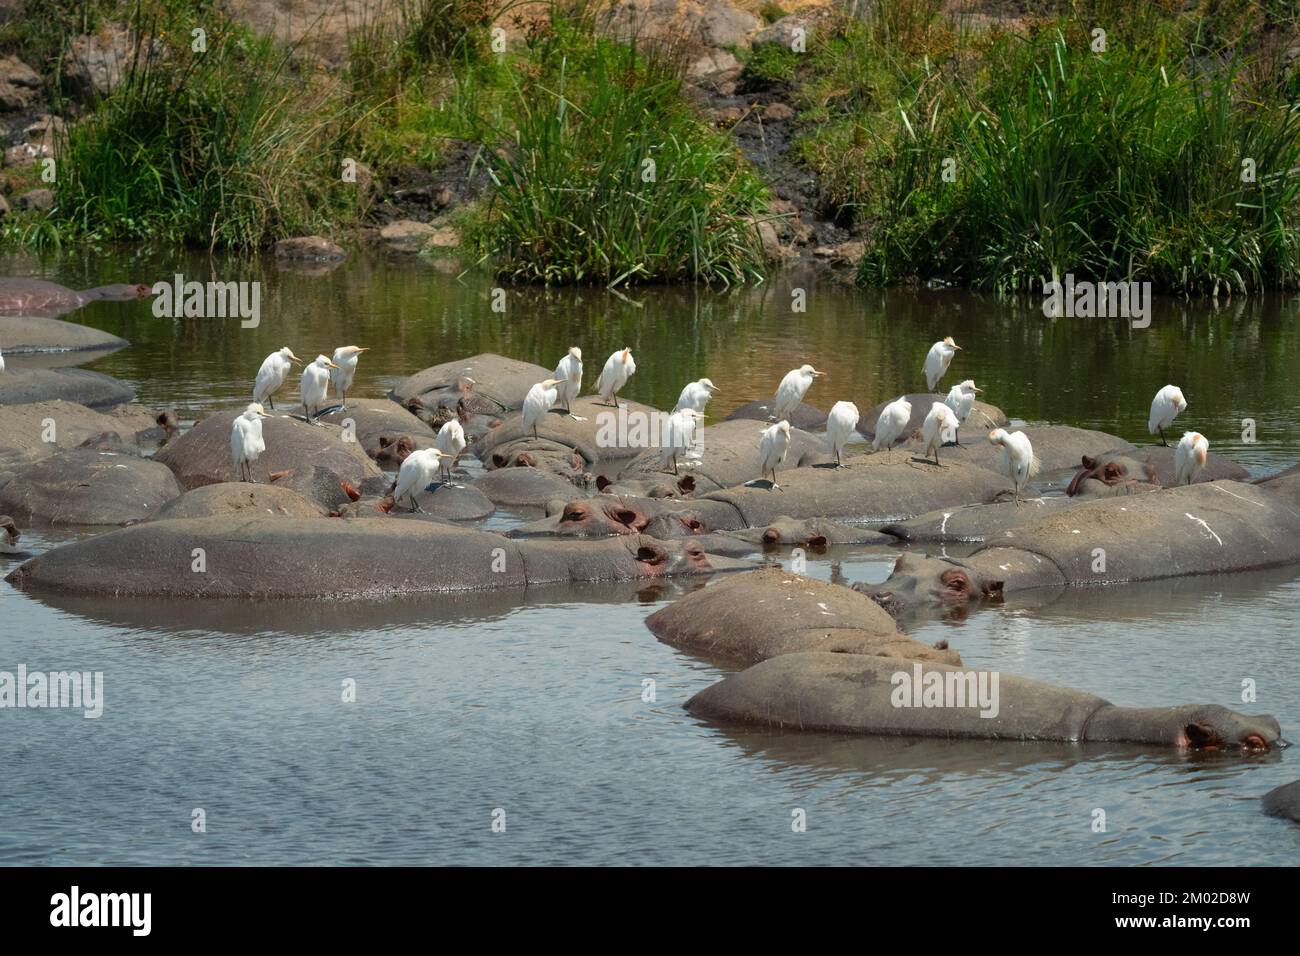 A herd of hippopotamus in the Serengeti with Cattle egret perched on them Stock Photo